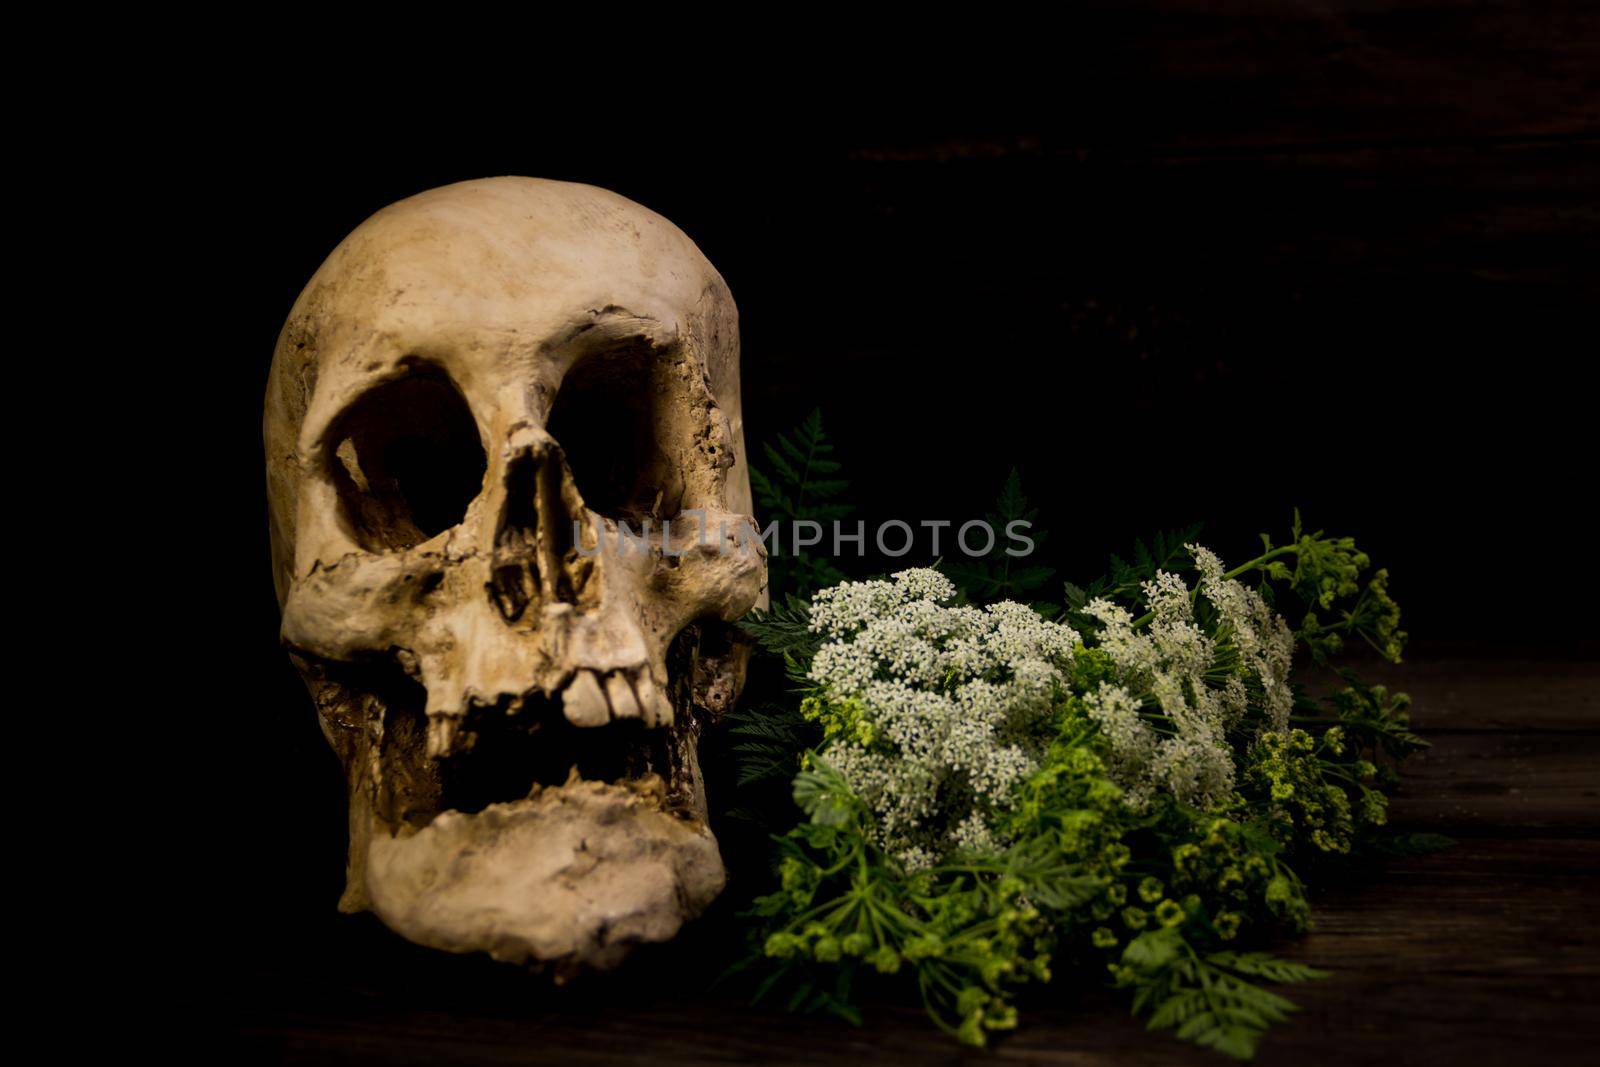 A bouquet of hemlock flowers with a human skull. Poisoning death concept